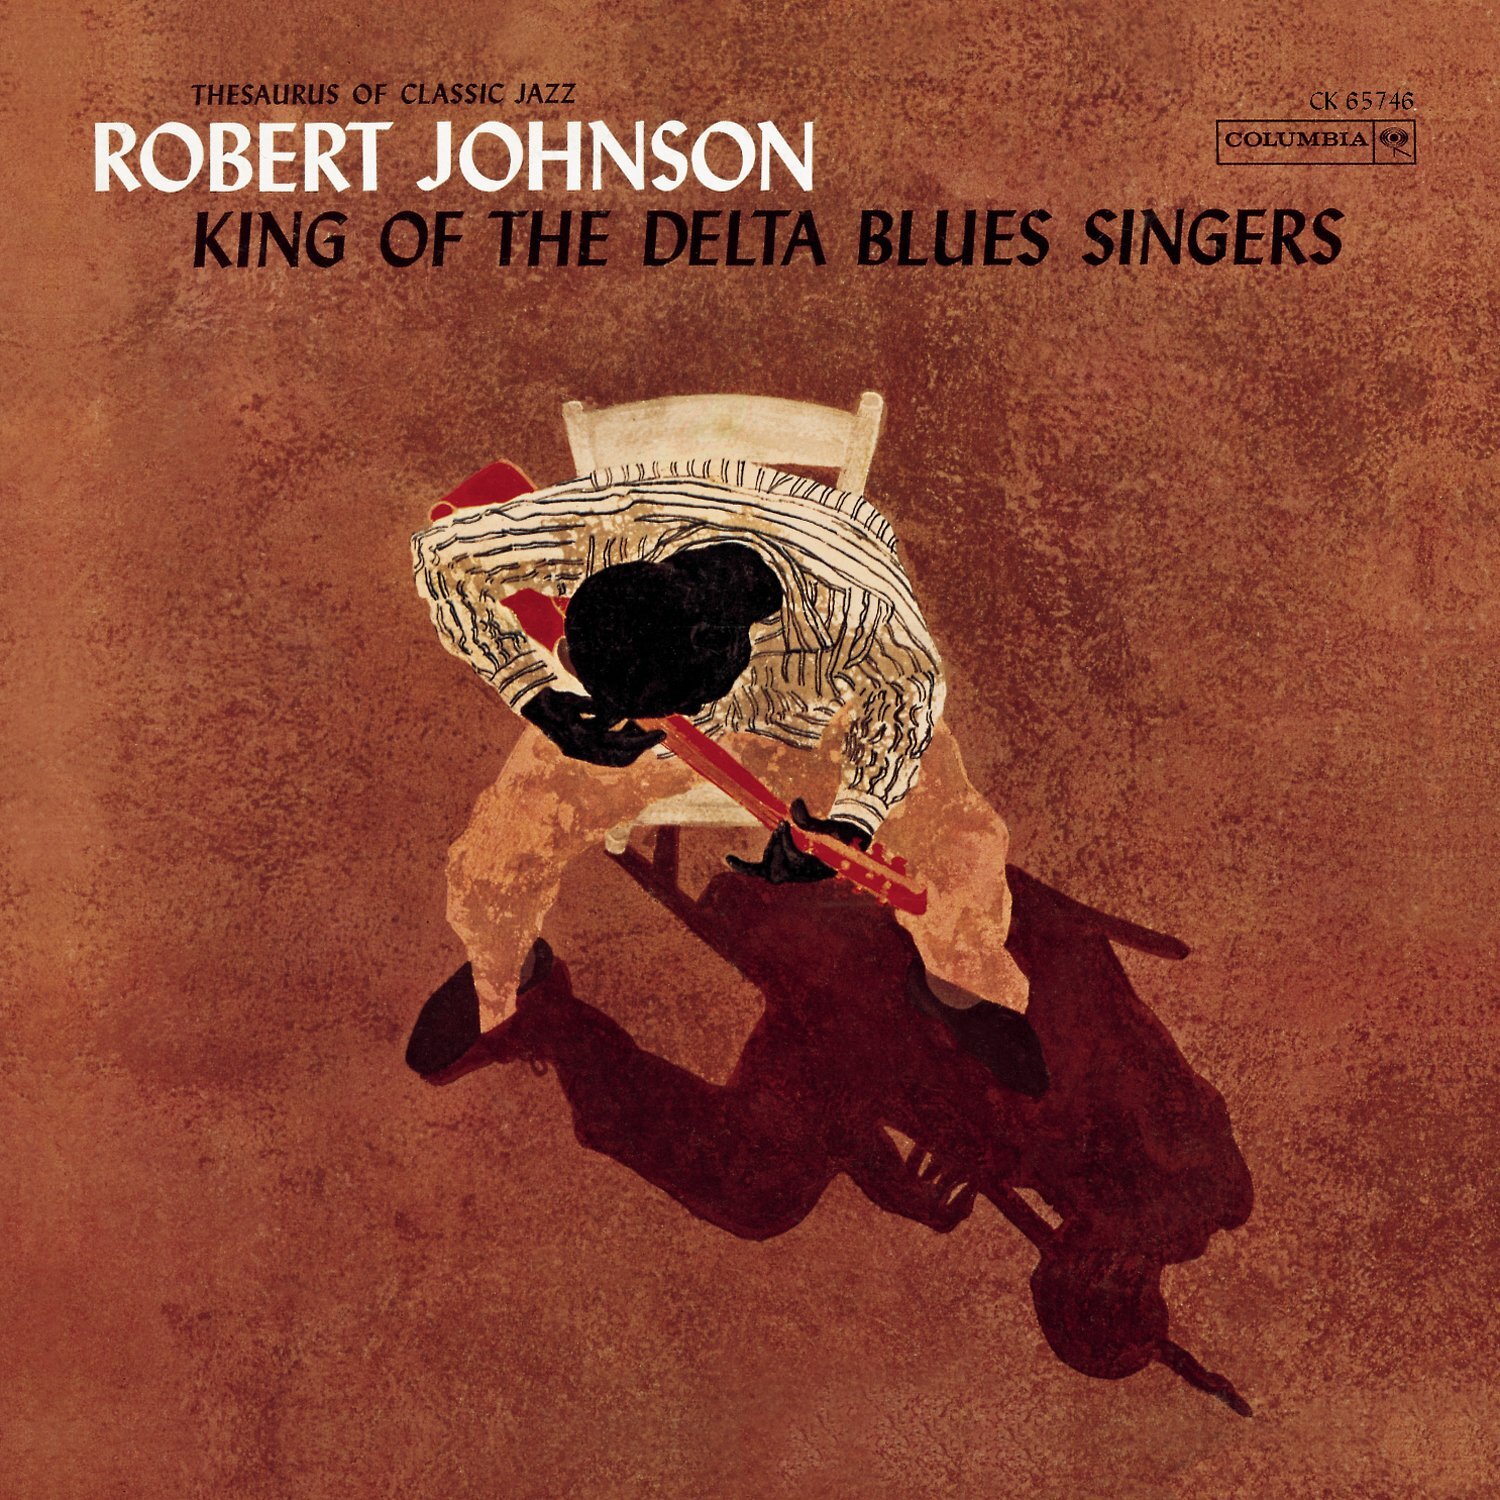 Robert Johnson - King of the Delta Blues Singers (How The Music of Black America Created Rock N Roll)